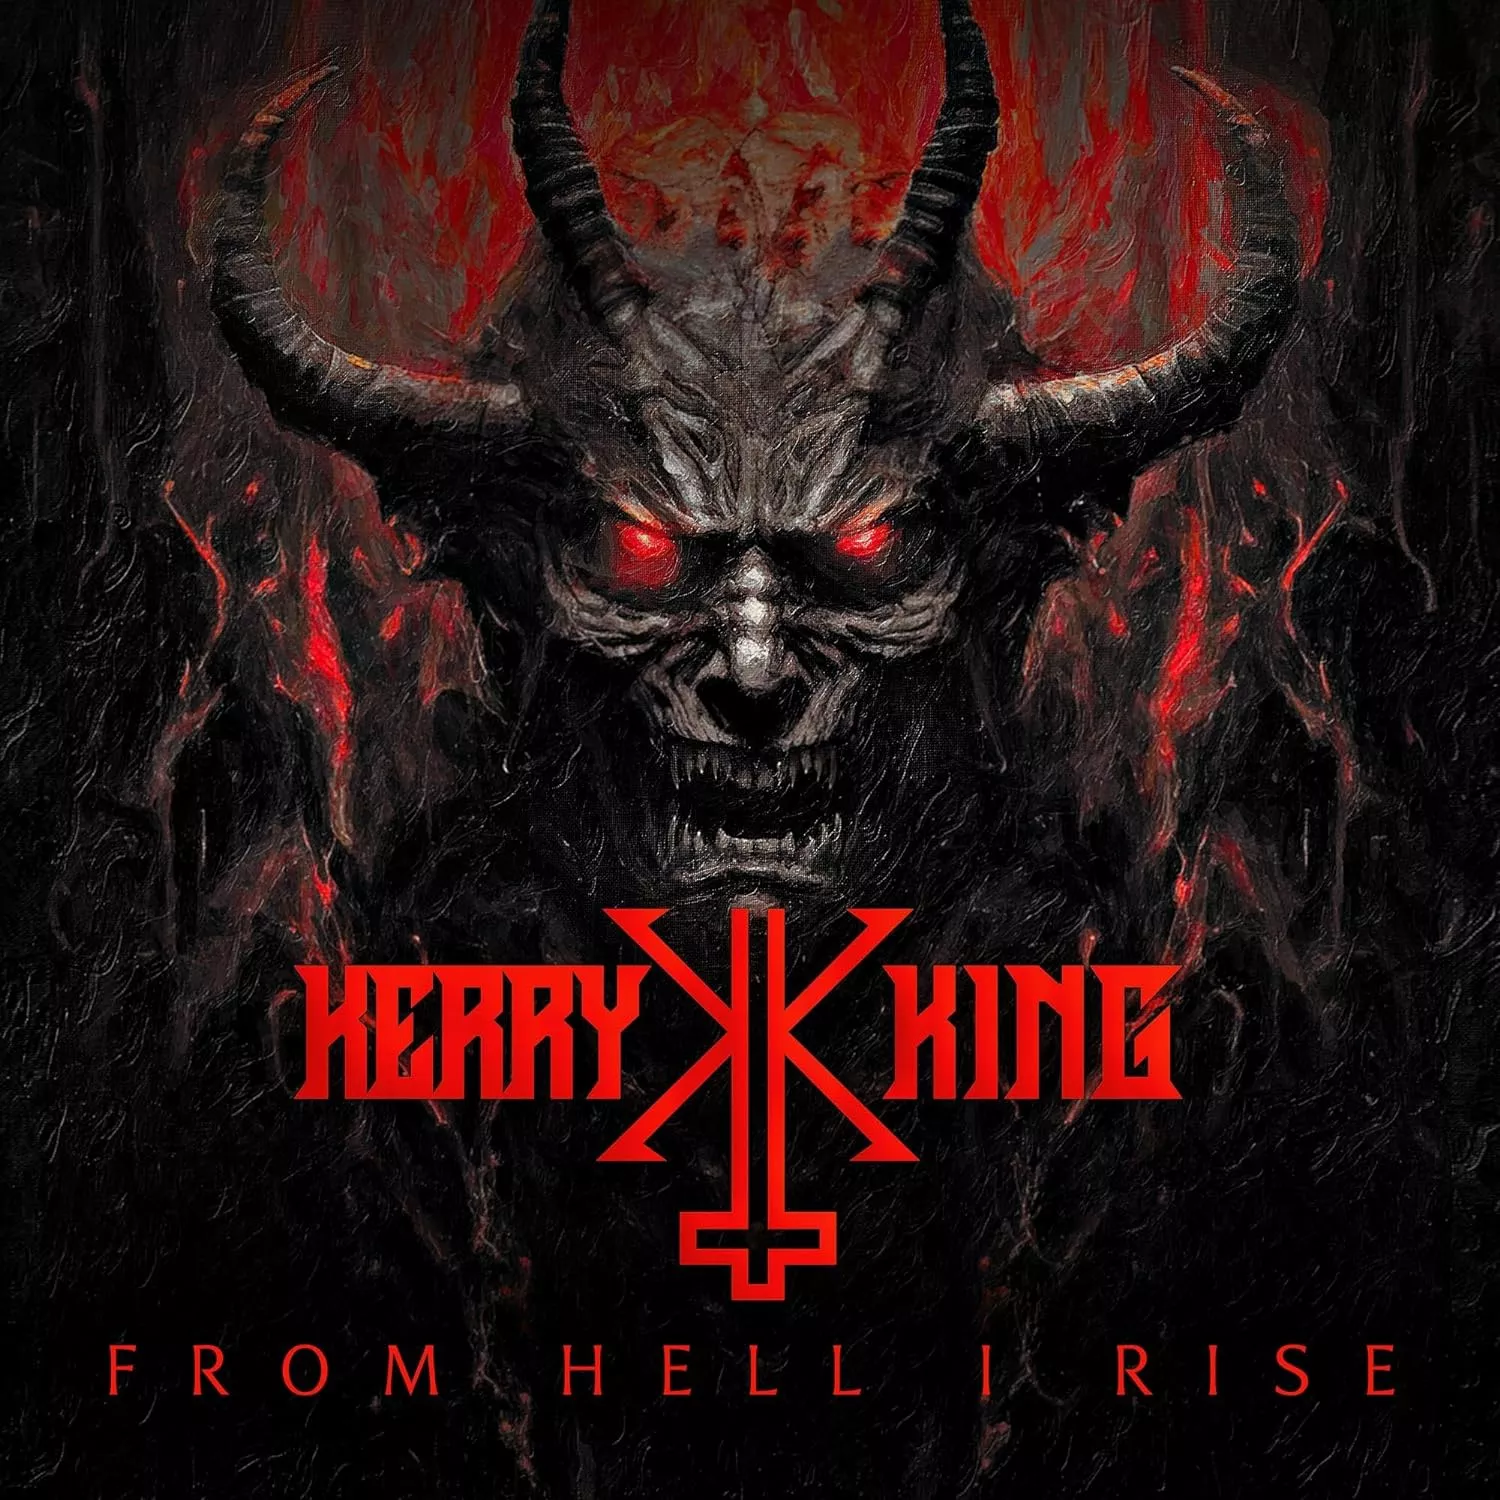 From Hell I Rise - Kerry King